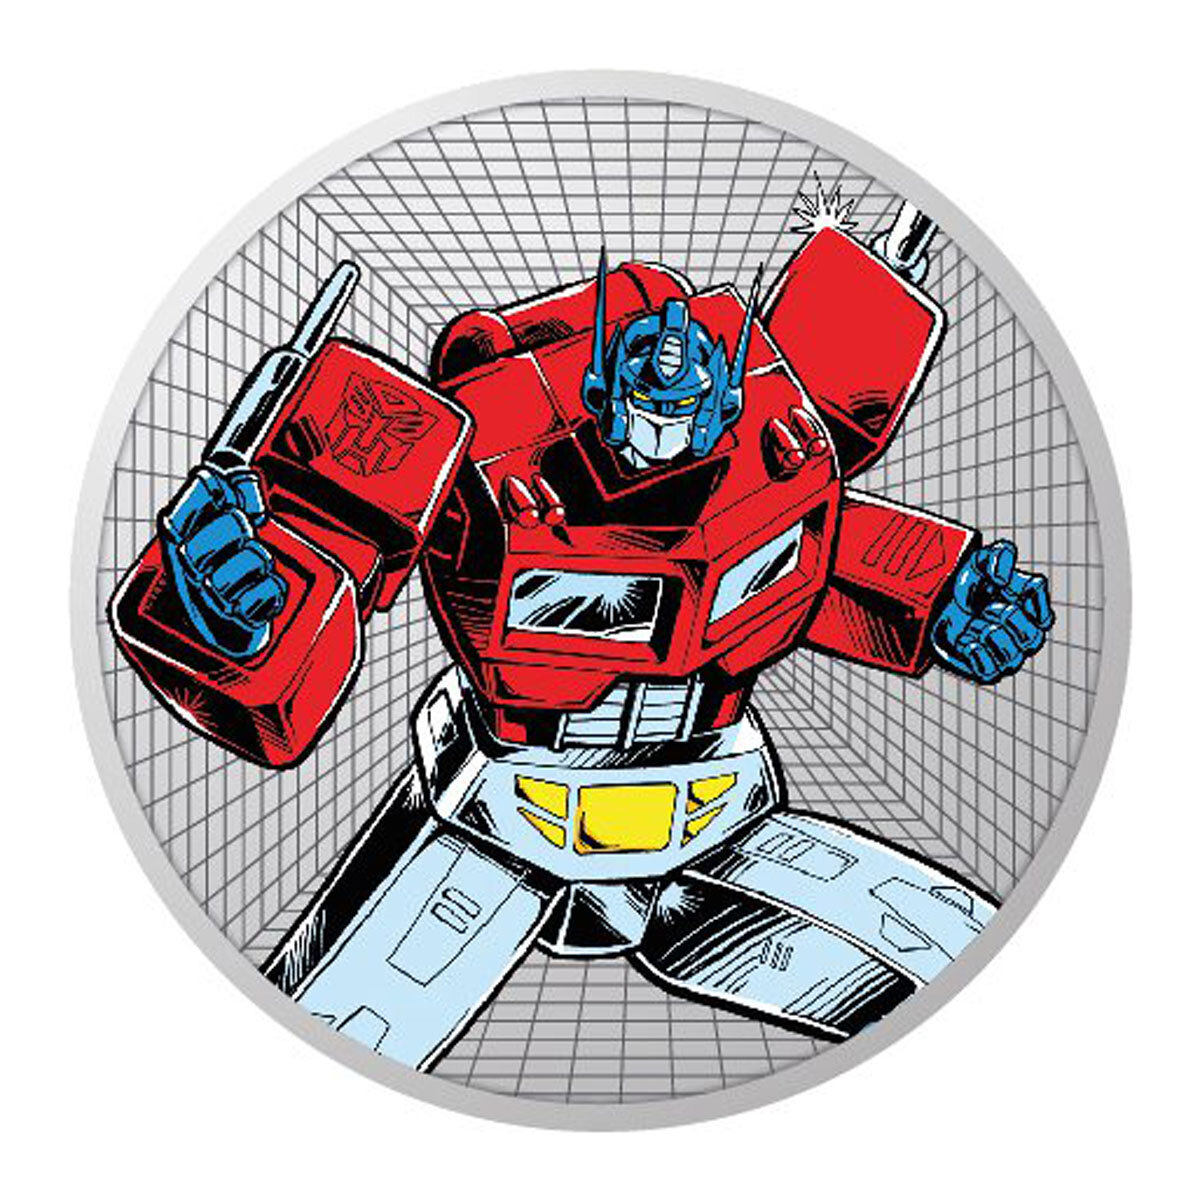 Buy Transformers Silver Plated Medal Cover Medal Front Image at Costco.co.uk